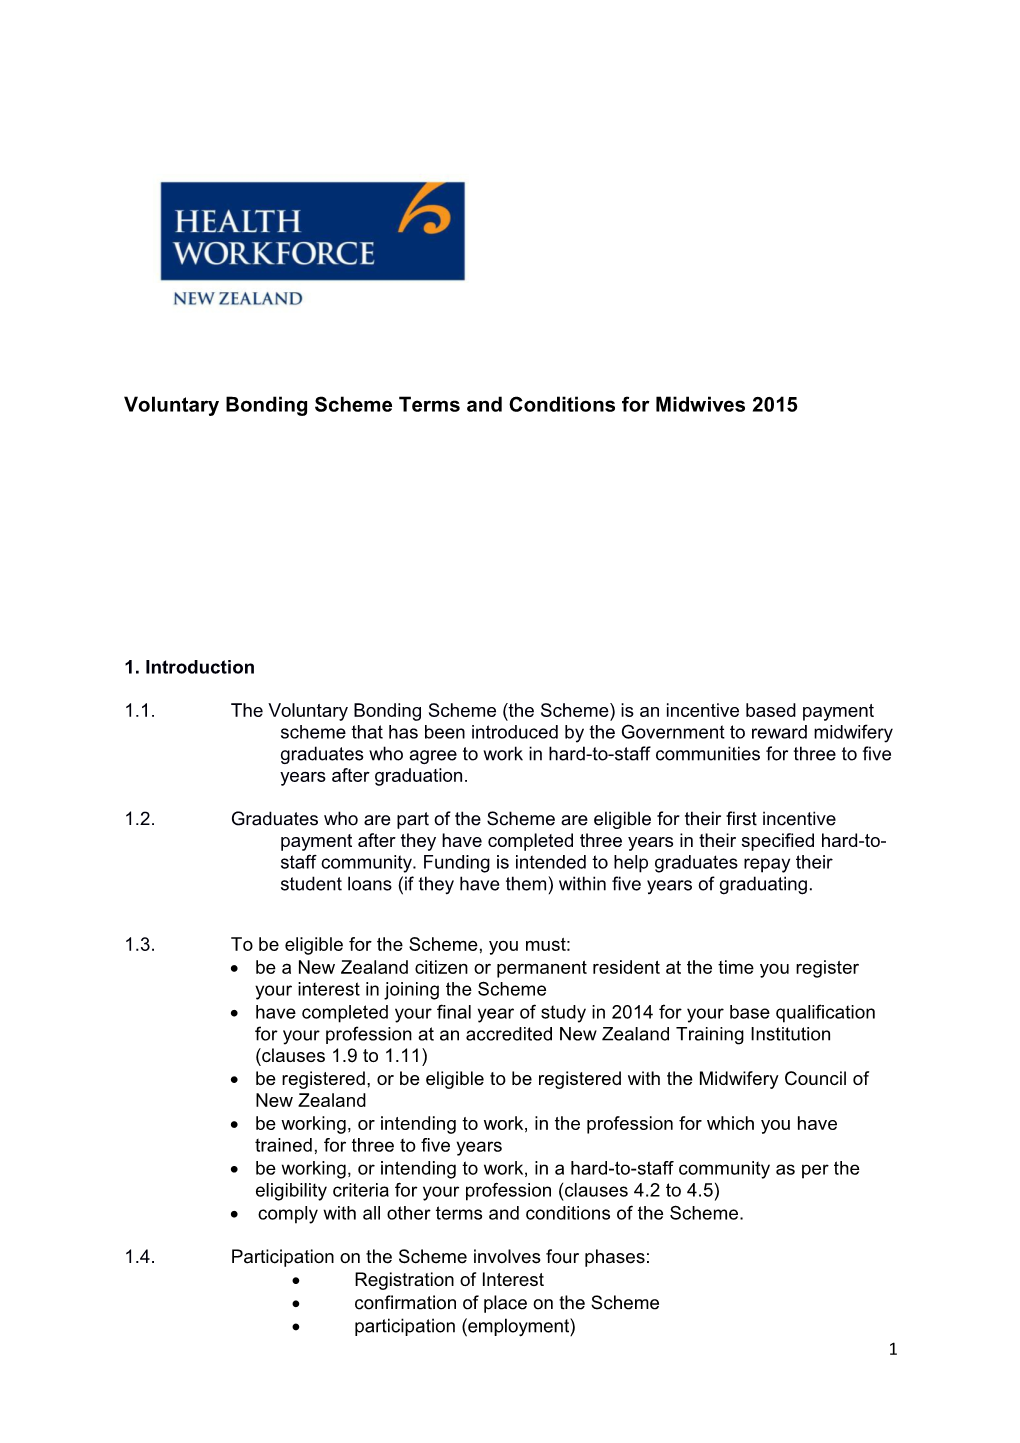 Voluntary Bonding Scheme Terms and Conditions for Midwives 2015